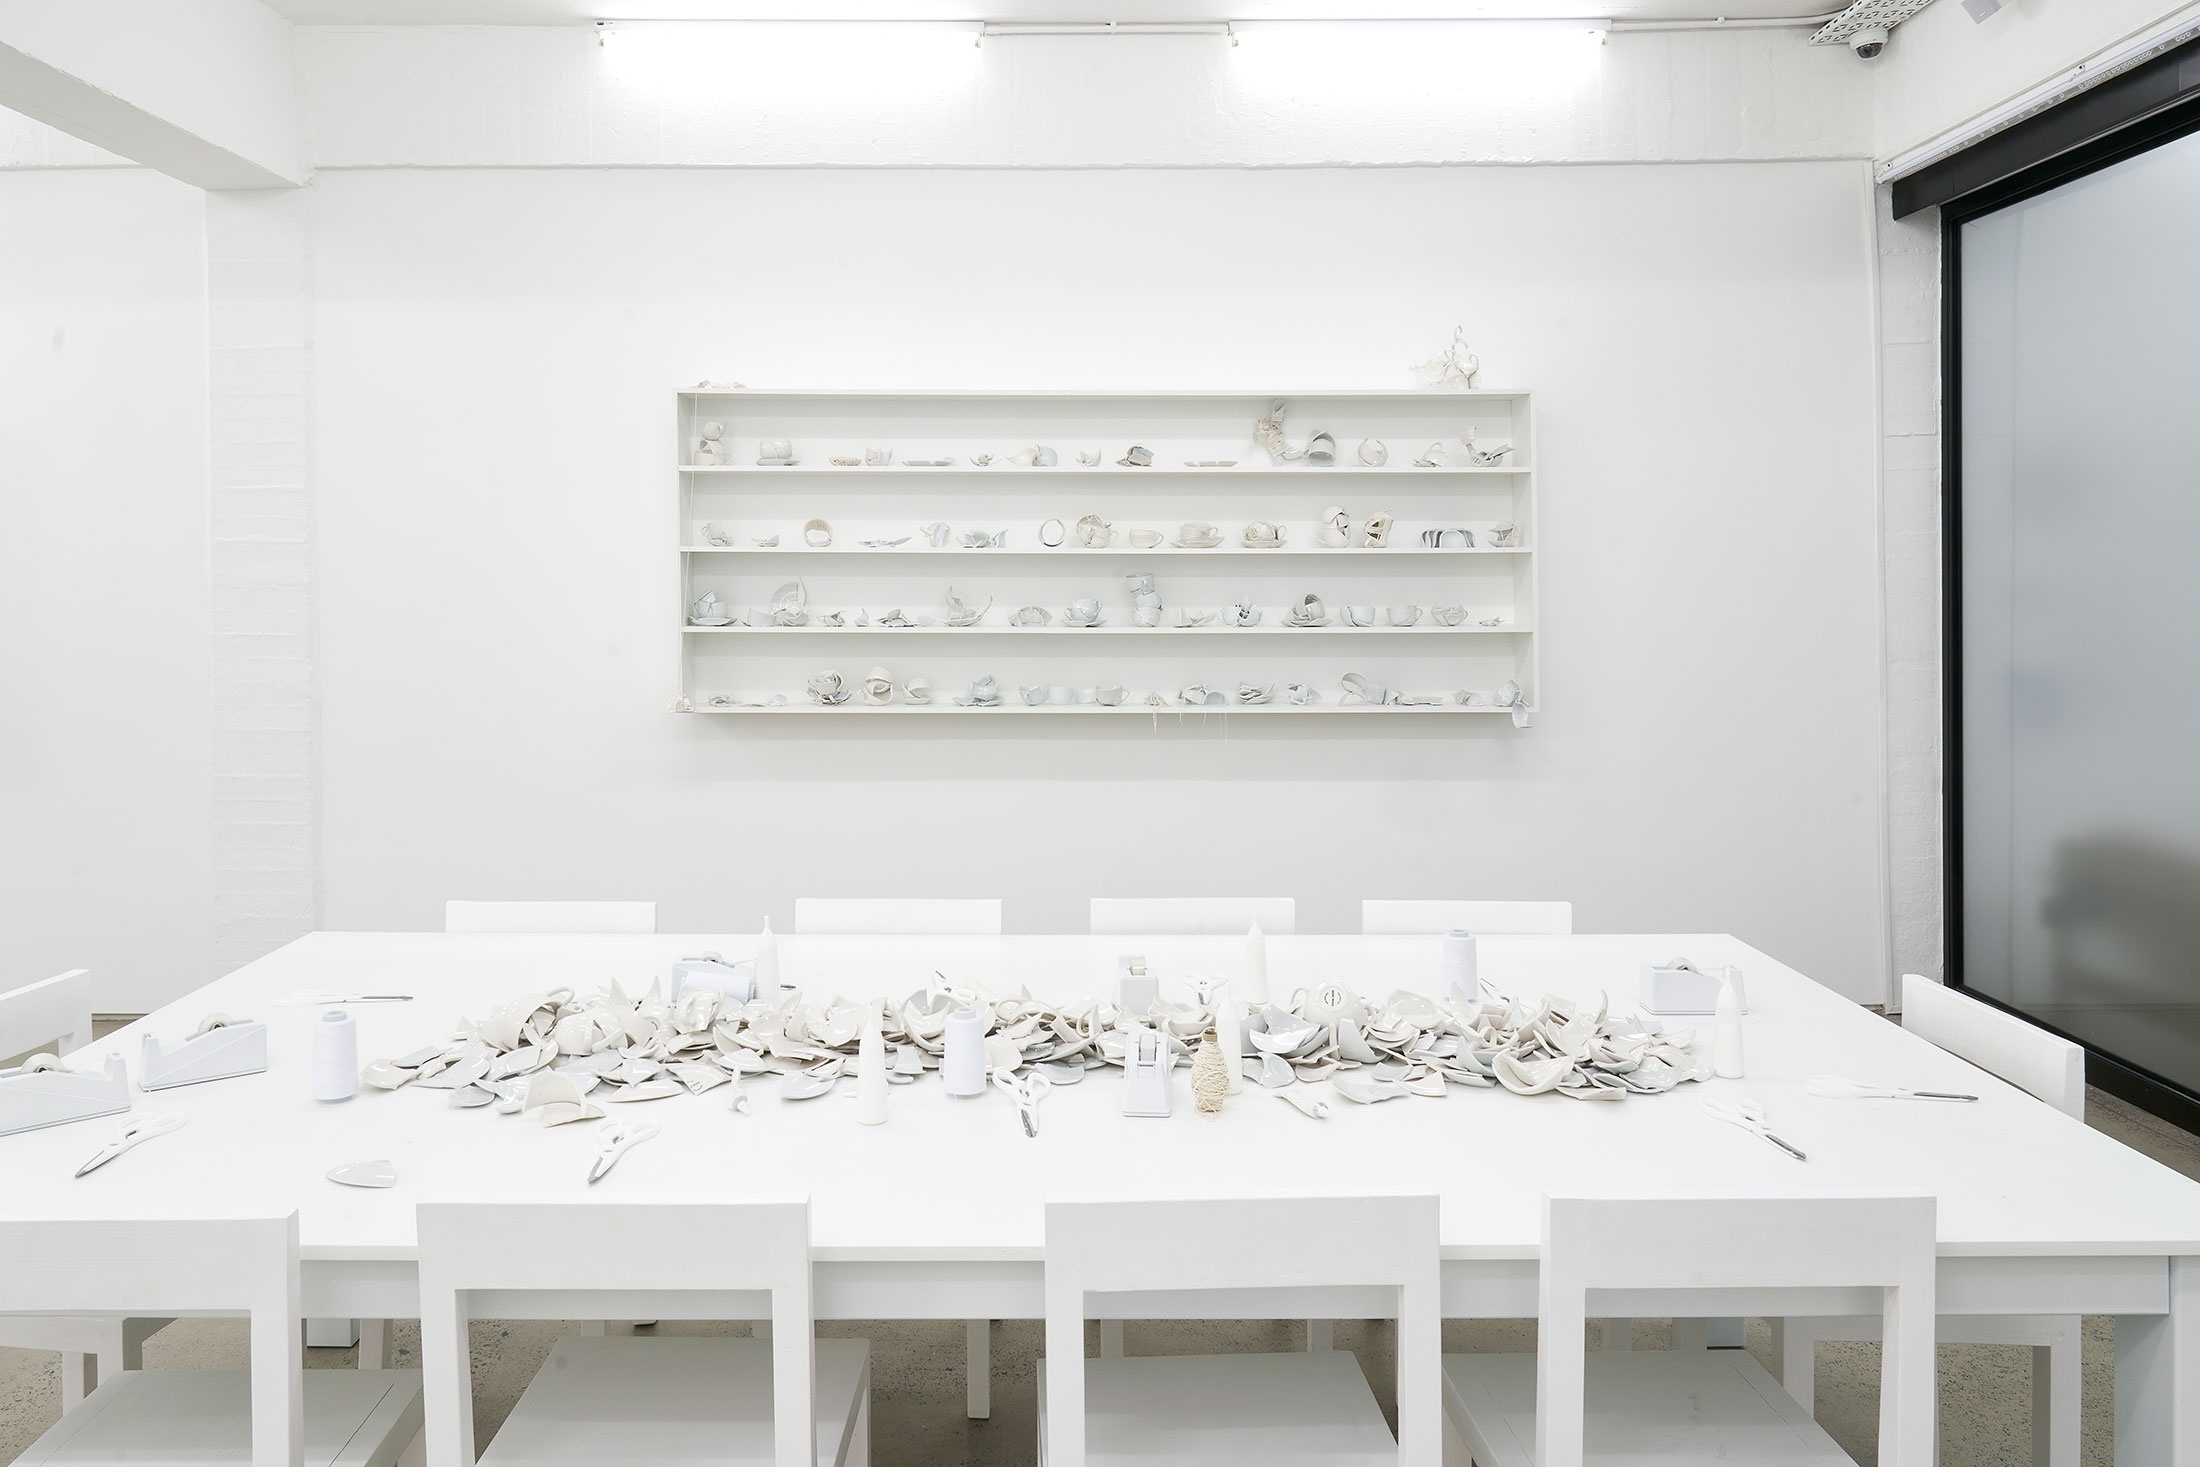 Installation photograph from the Customs exhibition in A4’s Gallery that shows Yoko Ono’s installation ‘MEND PIECE, A4 Arts Foundation, Cape Town version’ in A4’s ground-floor Reading Room. At the front, a white rectangular table with chairs holds ceramic fragments, tape, twine and scissors. At the back, a white wall-mounted shelving unit lines the white wall.
